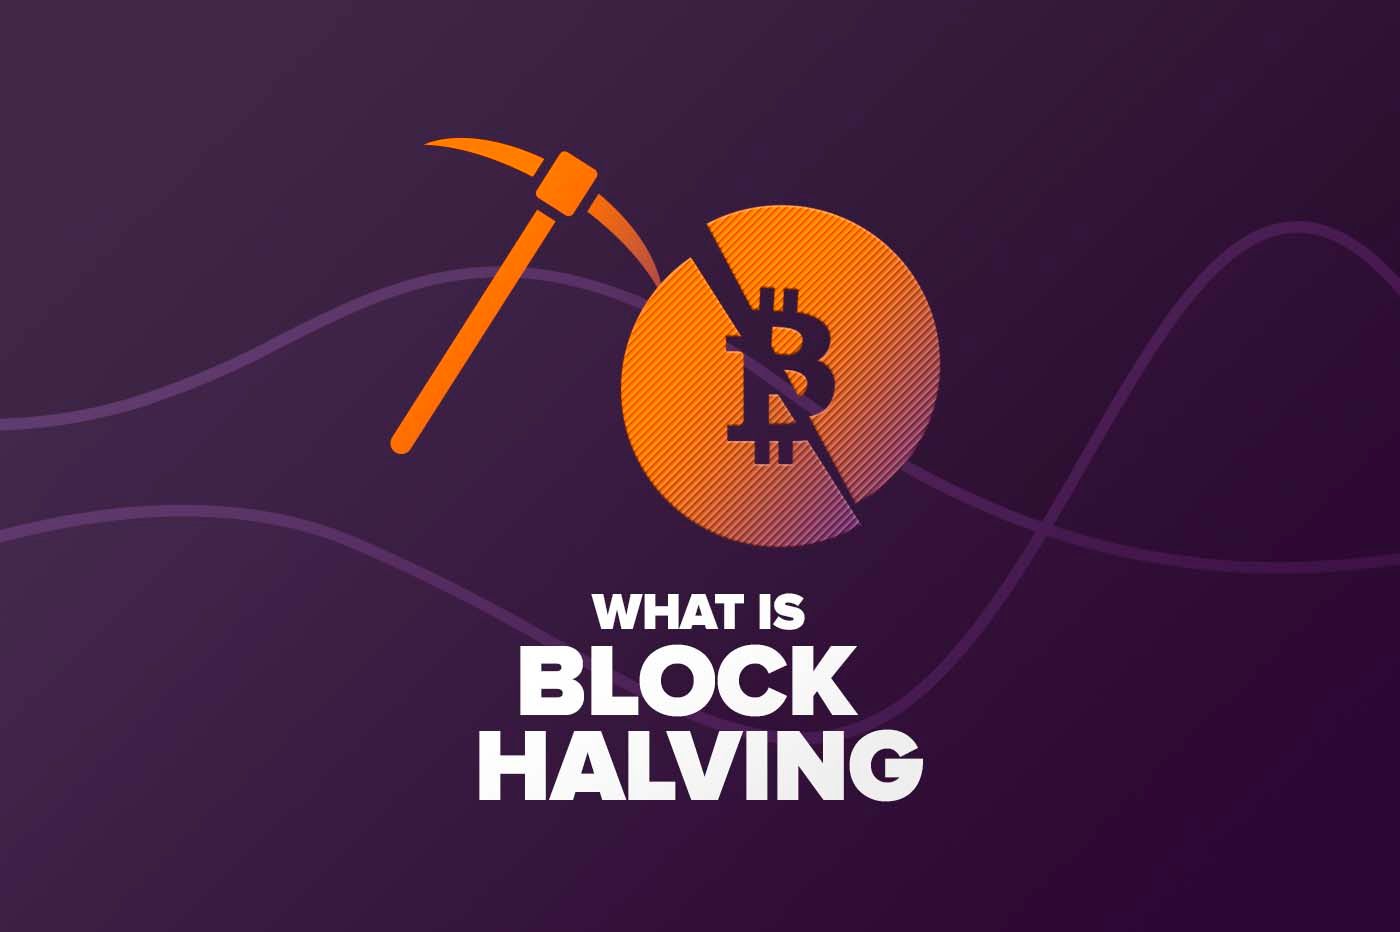 Bitcoin Halving 2020: What Block Halving Has to Do with Main Cryptocurrencies